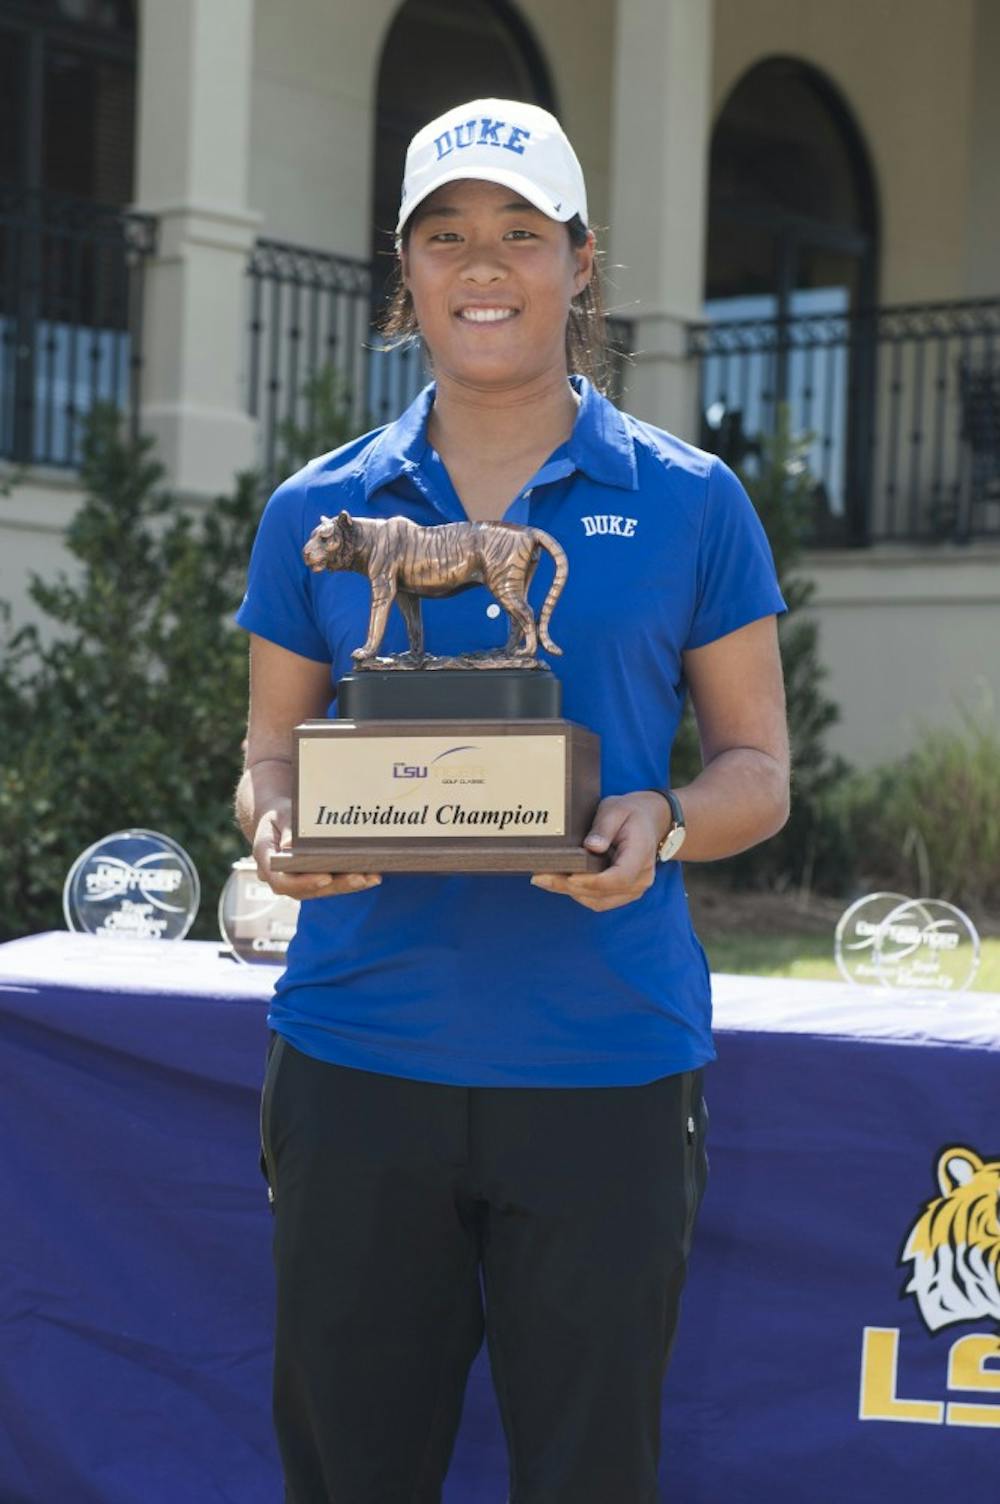 Senior Celine Boutier was the only golfer to finish under par, winning the individual title by 14 strokes at the LSU Tiger Golf Classic.